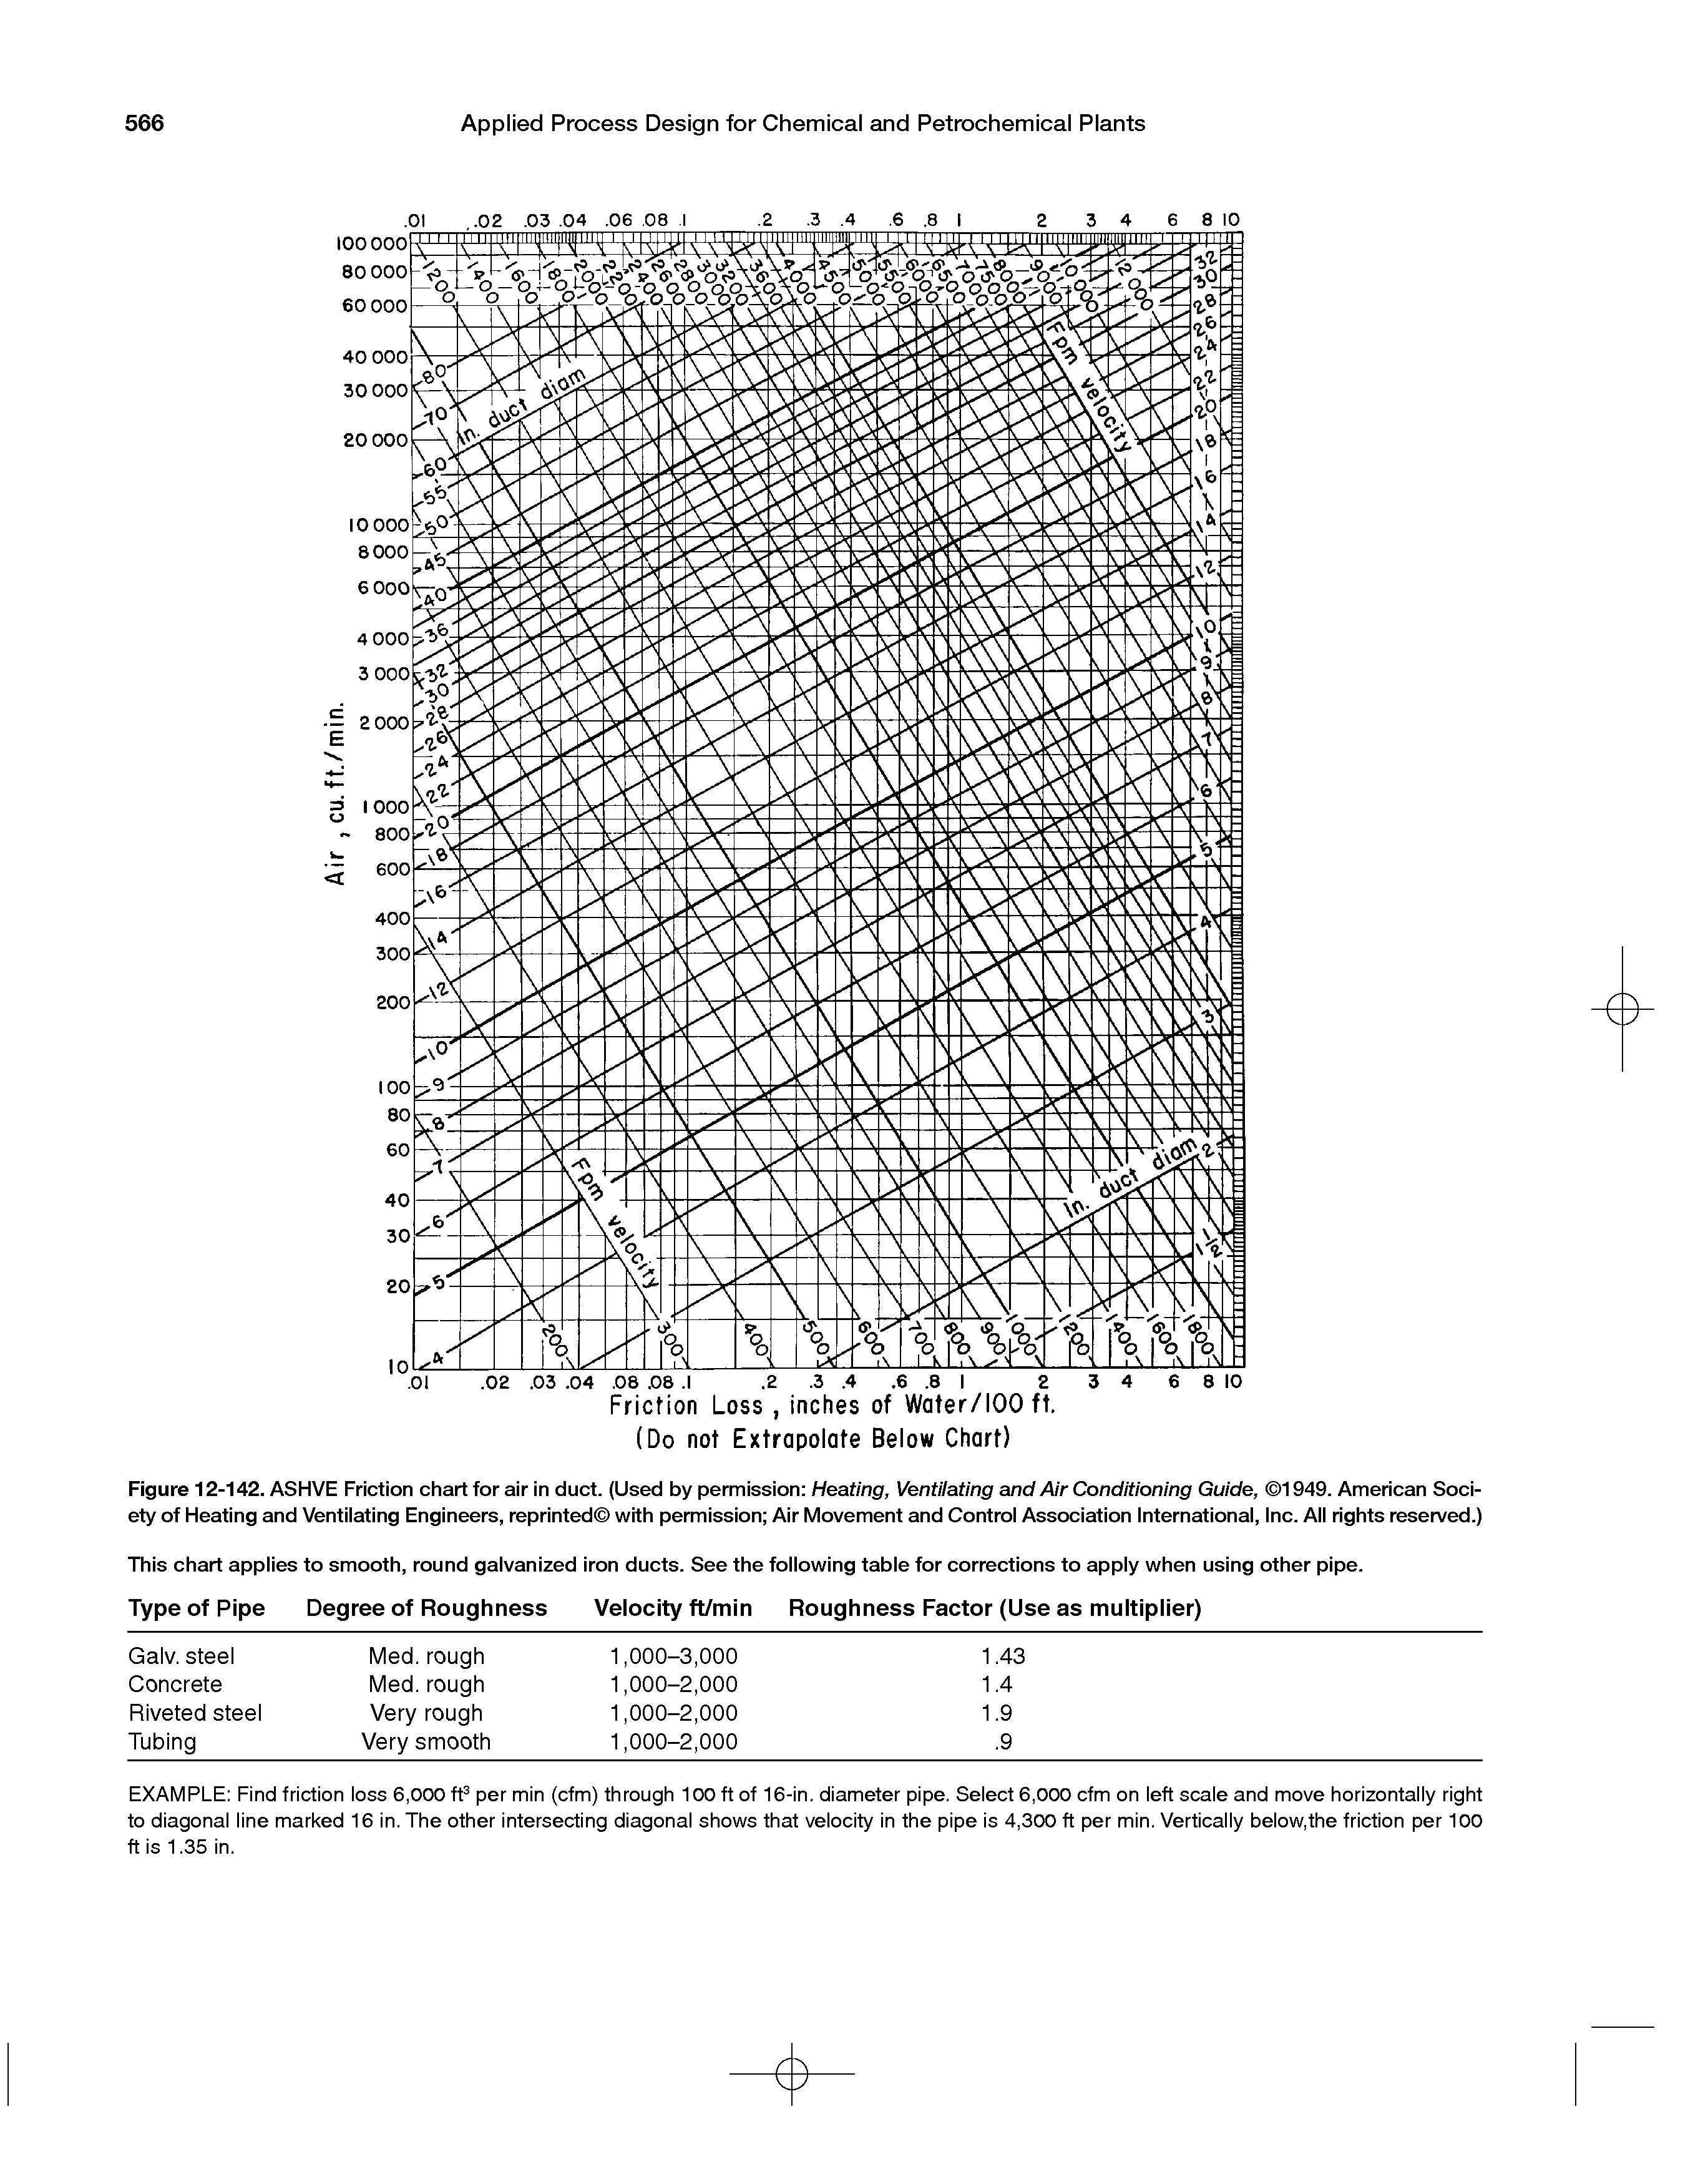 Figure 12-142. ASHVE Friction chart for air in duct. (Used by permission Heating, Ventilating and Air Conditioning Guide, 1949. American Society of Heating and Ventilating Engineers, reprinted with permission Air Movement and Control Association International, Inc. All rights reserved.)...